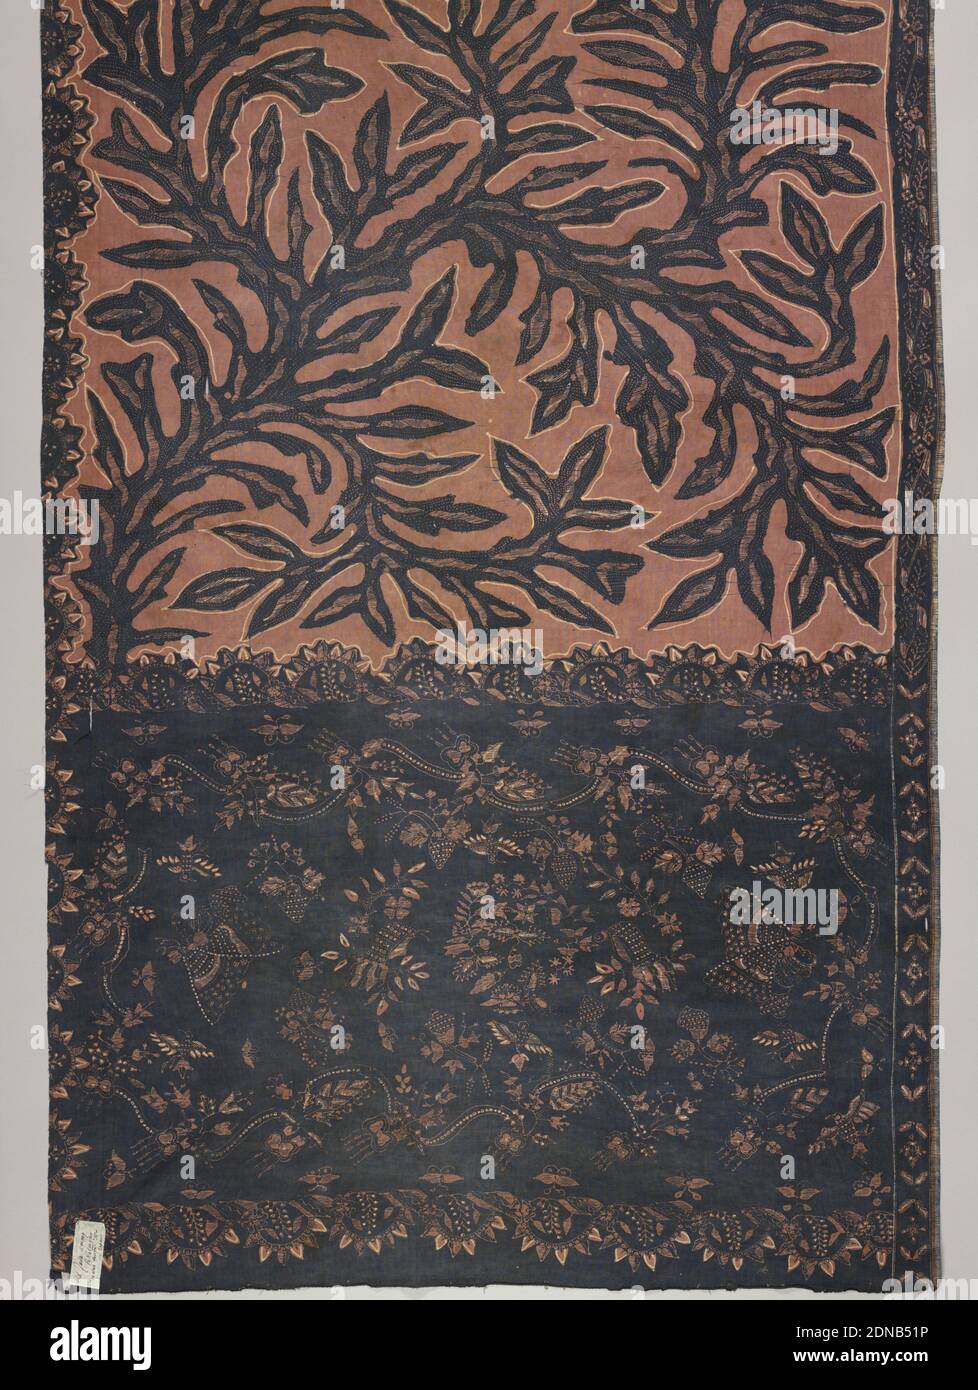 Sea Weed, Medium: cotton Technique: wax resist dyeing (batik) on plain weave, Batik sarong in brown, pink, and dark blue. Dark blue seaweed pattern placed freely over the pink-brown ground in the body or 'badan' of the piece. The head or 'kepala' (broad band with different coloring and pattern than remainder) shows dark ground with floral pattern., Pekalongan, Indonesia, 19th century, printed, dyed & painted textiles, Sarong, Sarong Stock Photo